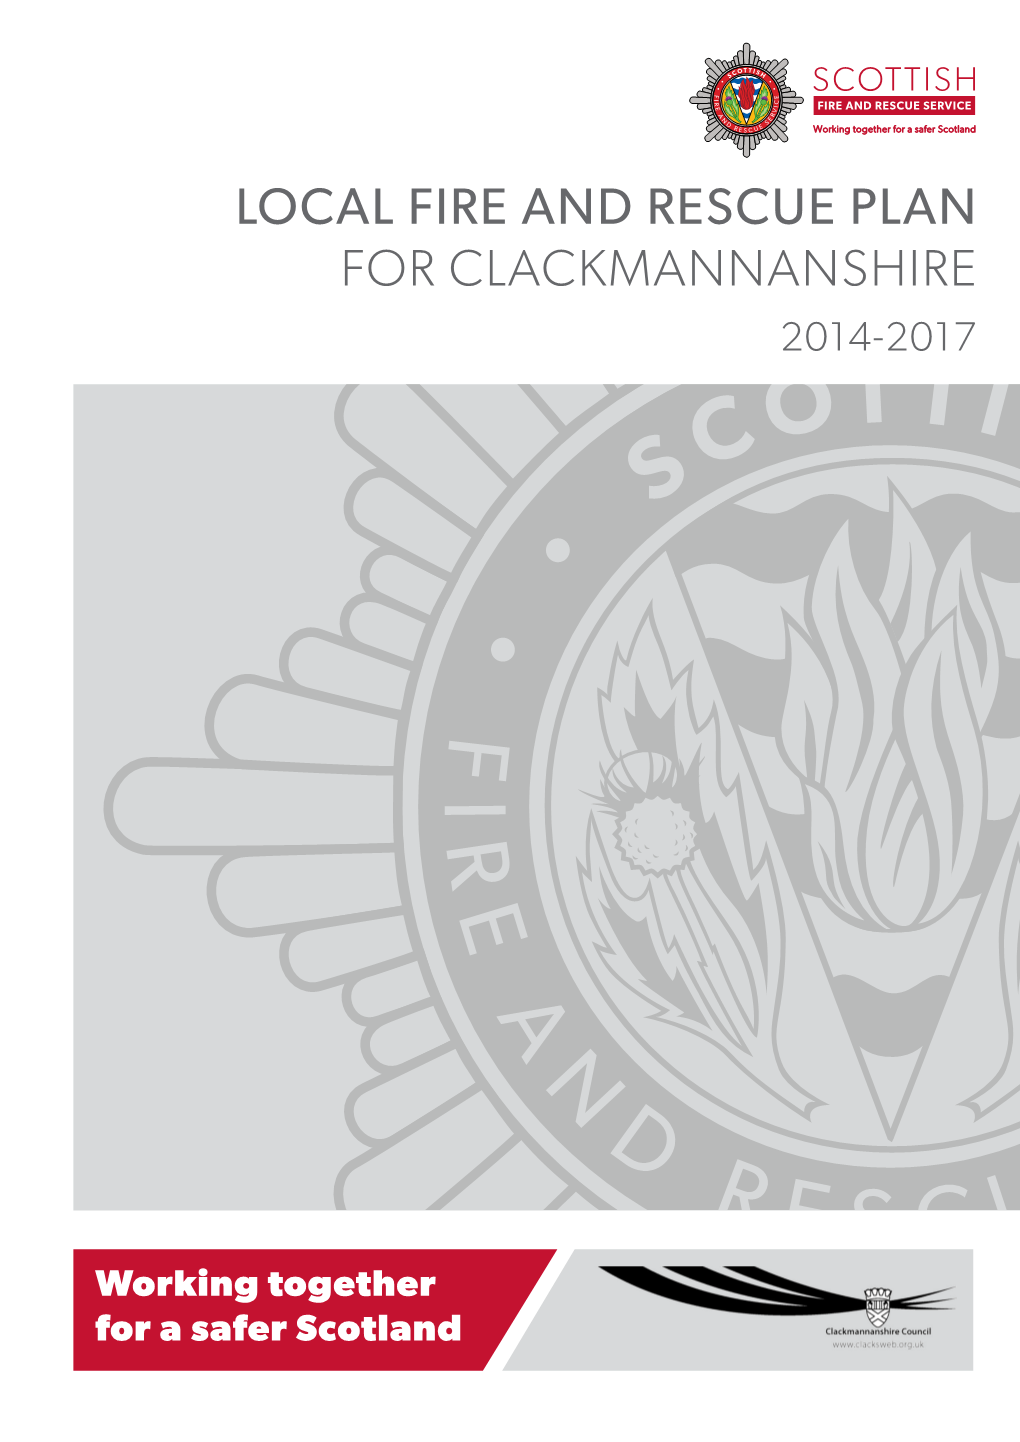 Local Fire and Rescue Plan for Clackmannanshire 2014-2017